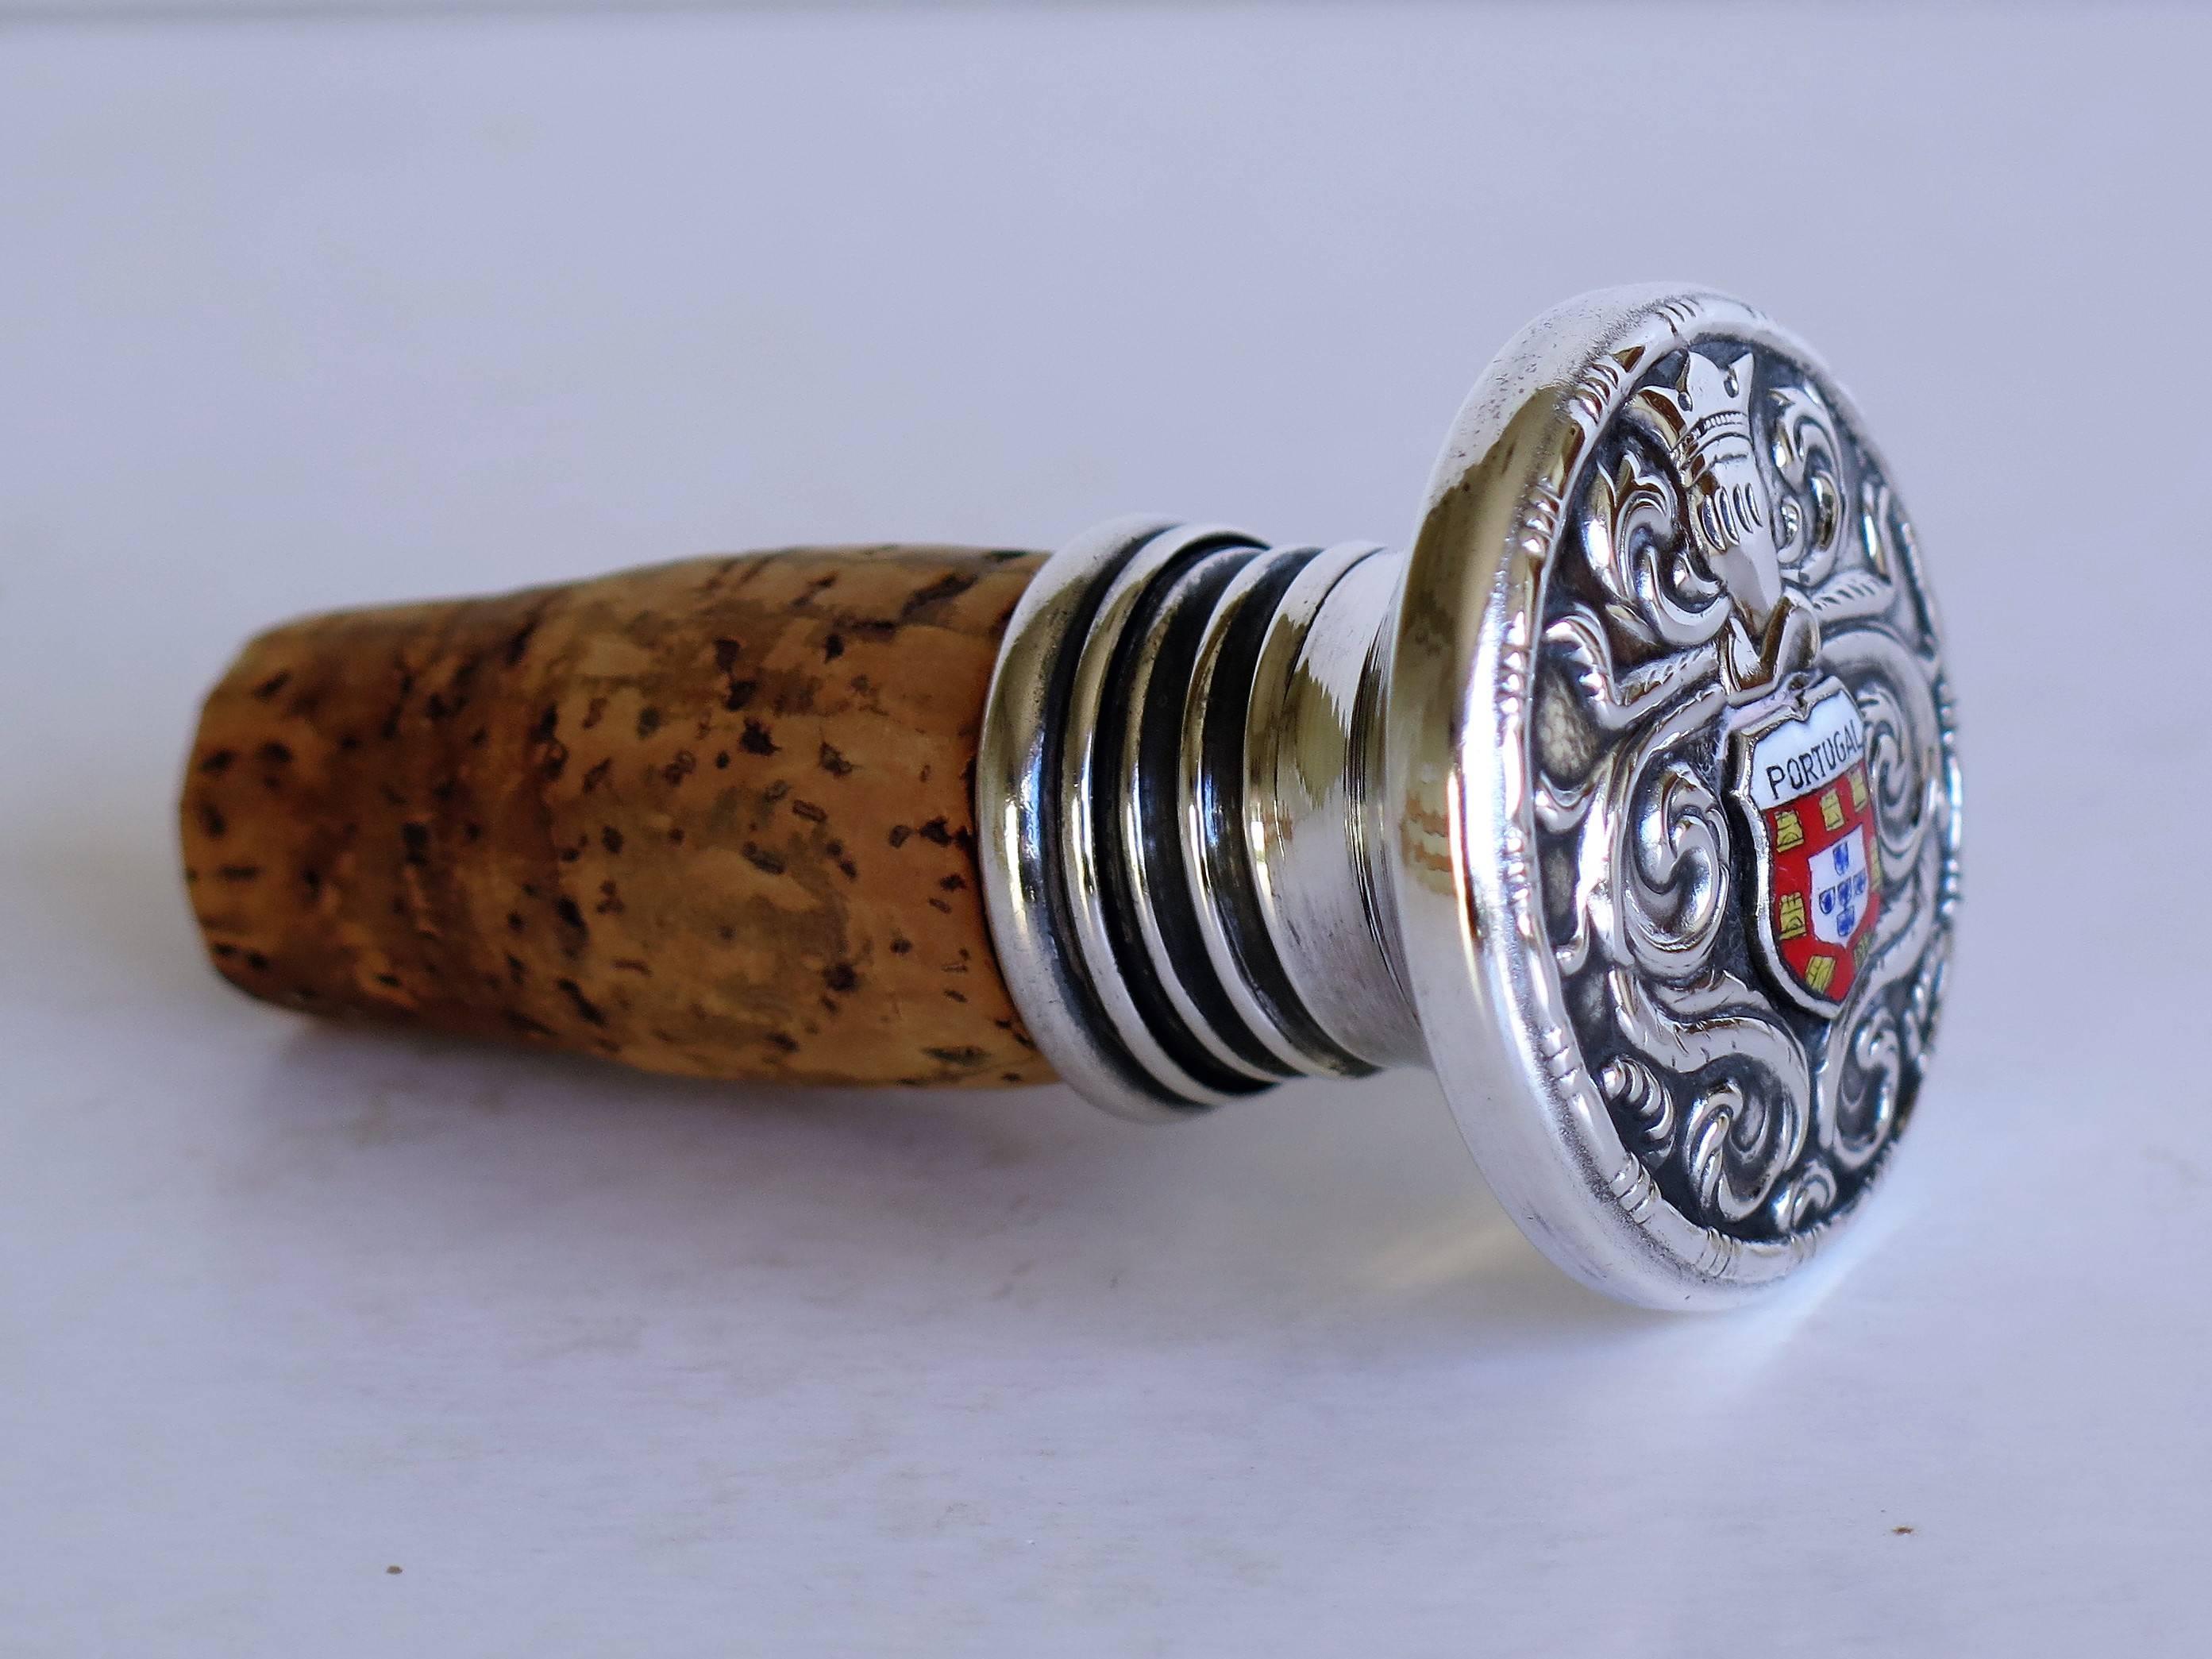 19th Century Silver Wine Bottle Stopper with Portugal Coat of Arms and Cork Stopper